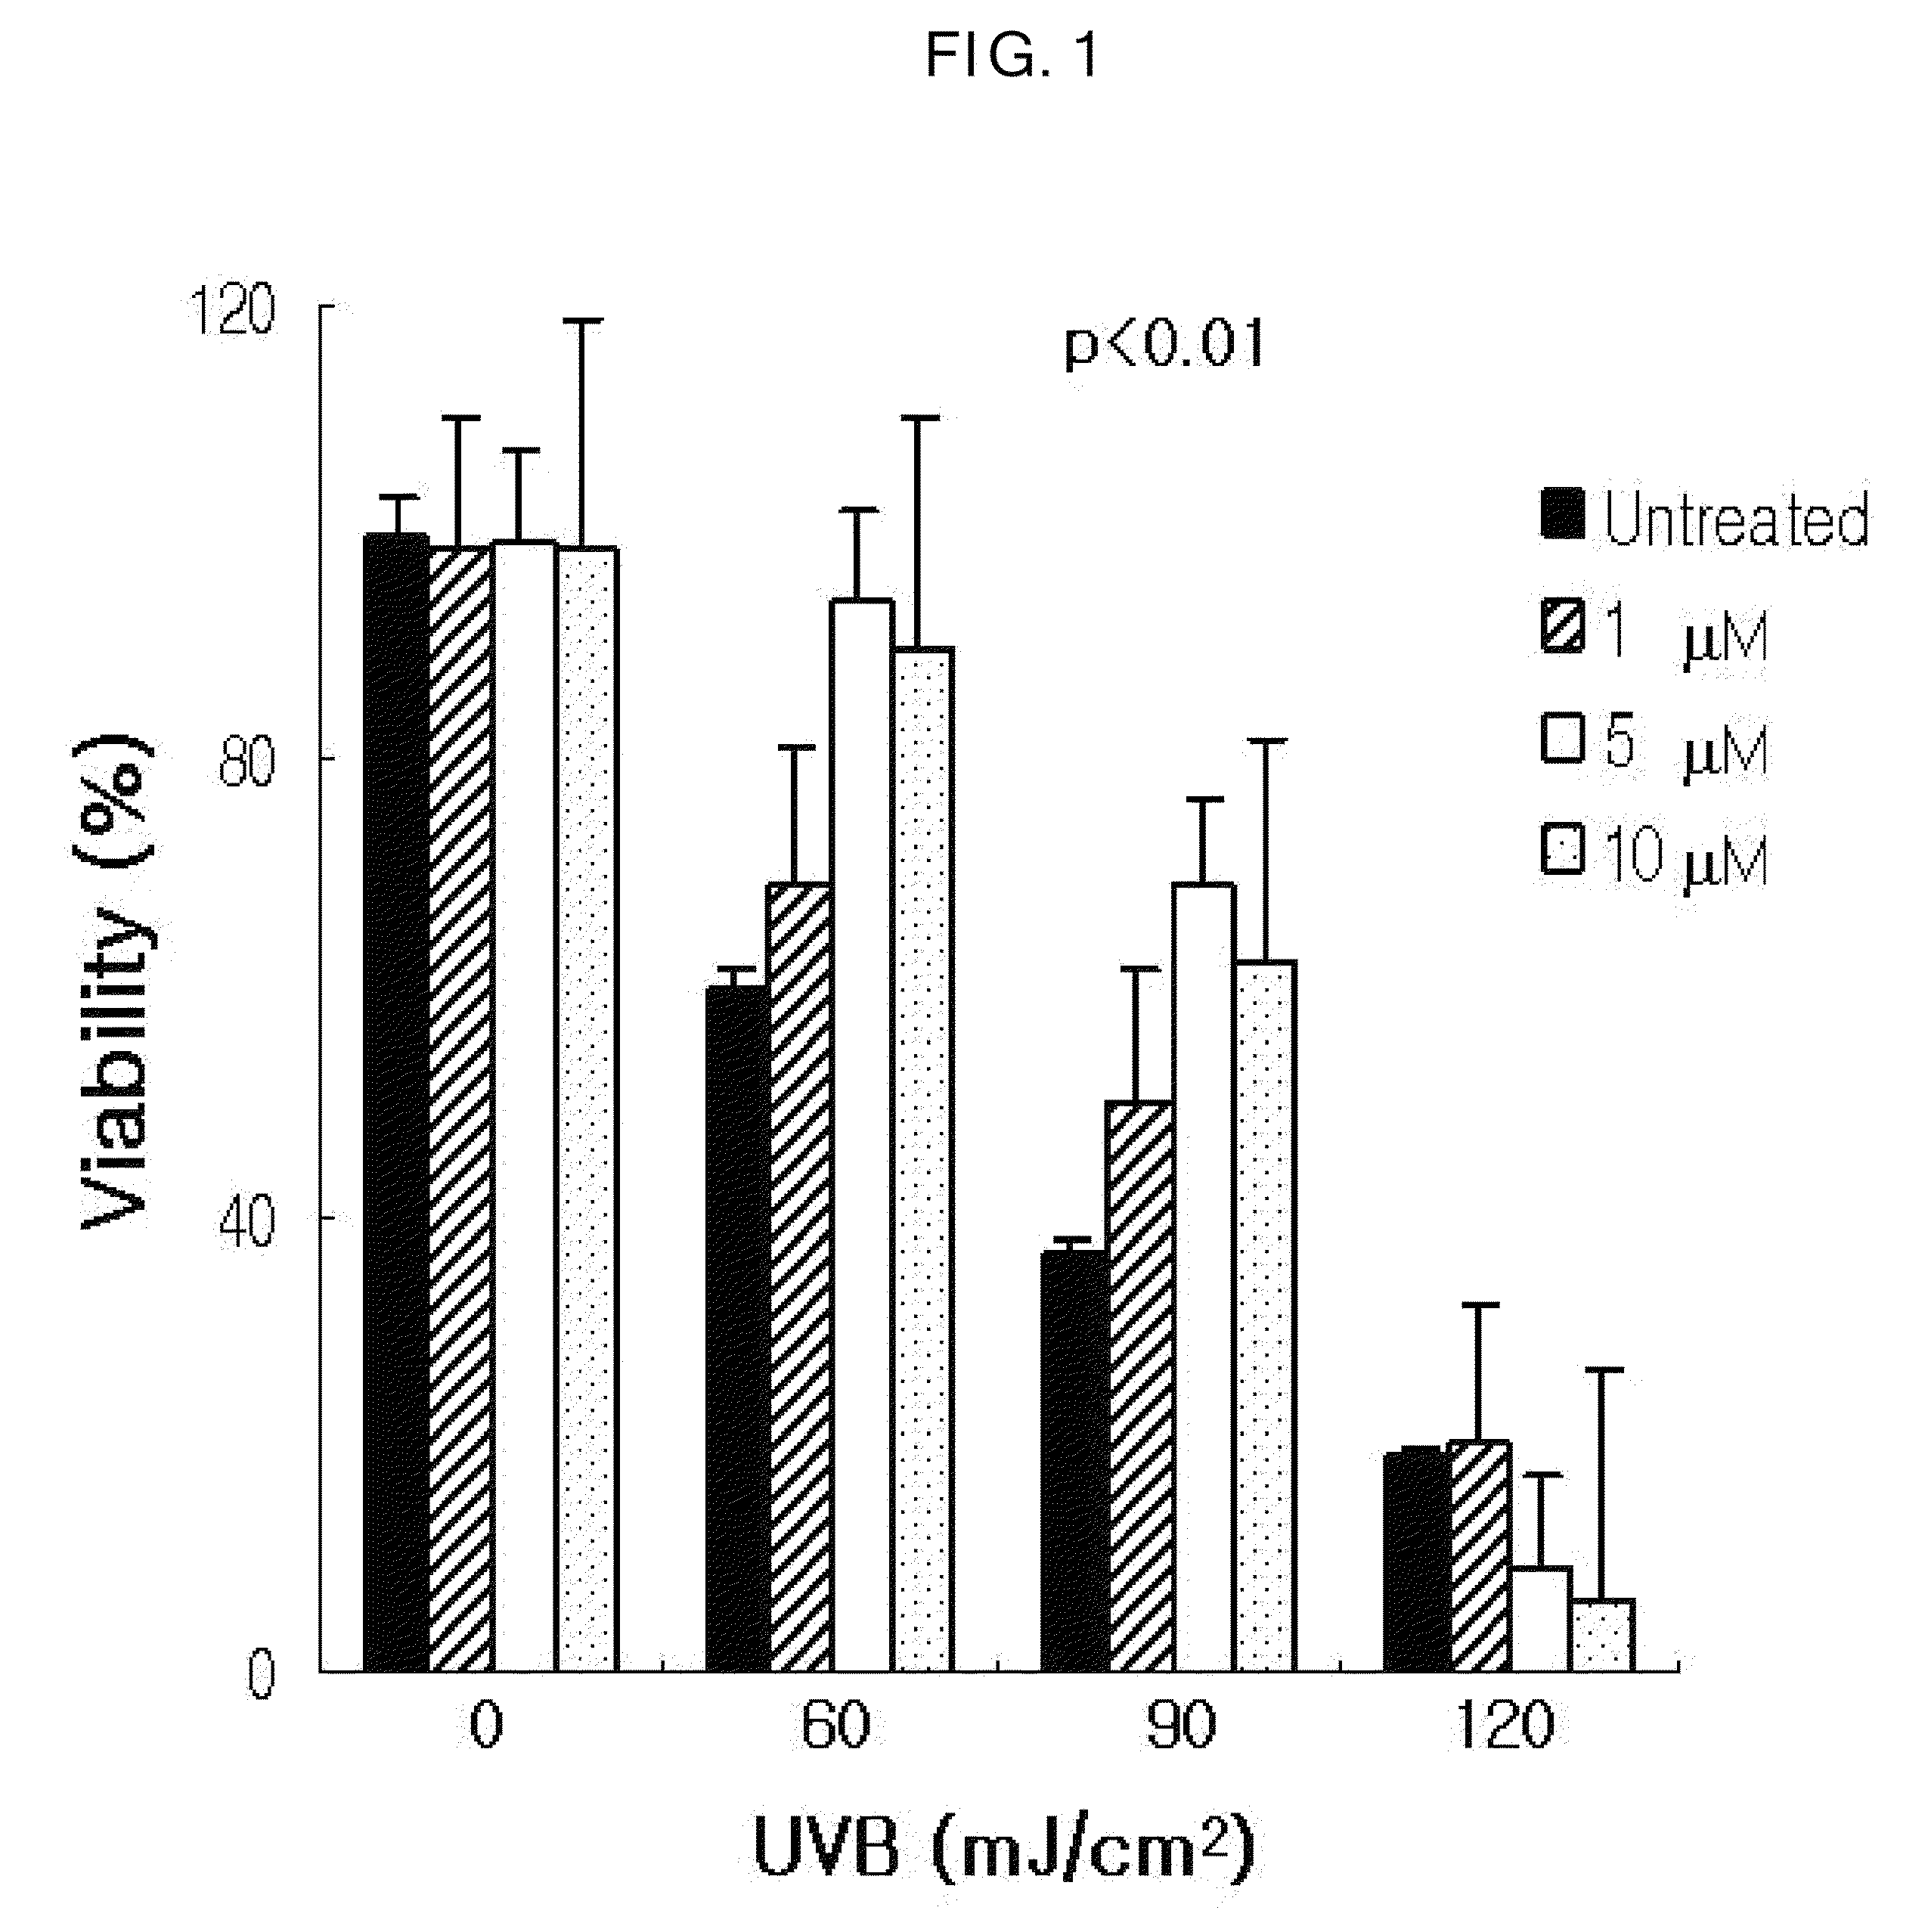 Agent for controlling Bcl-2 expression comprising ginsenoside F1 as an active component